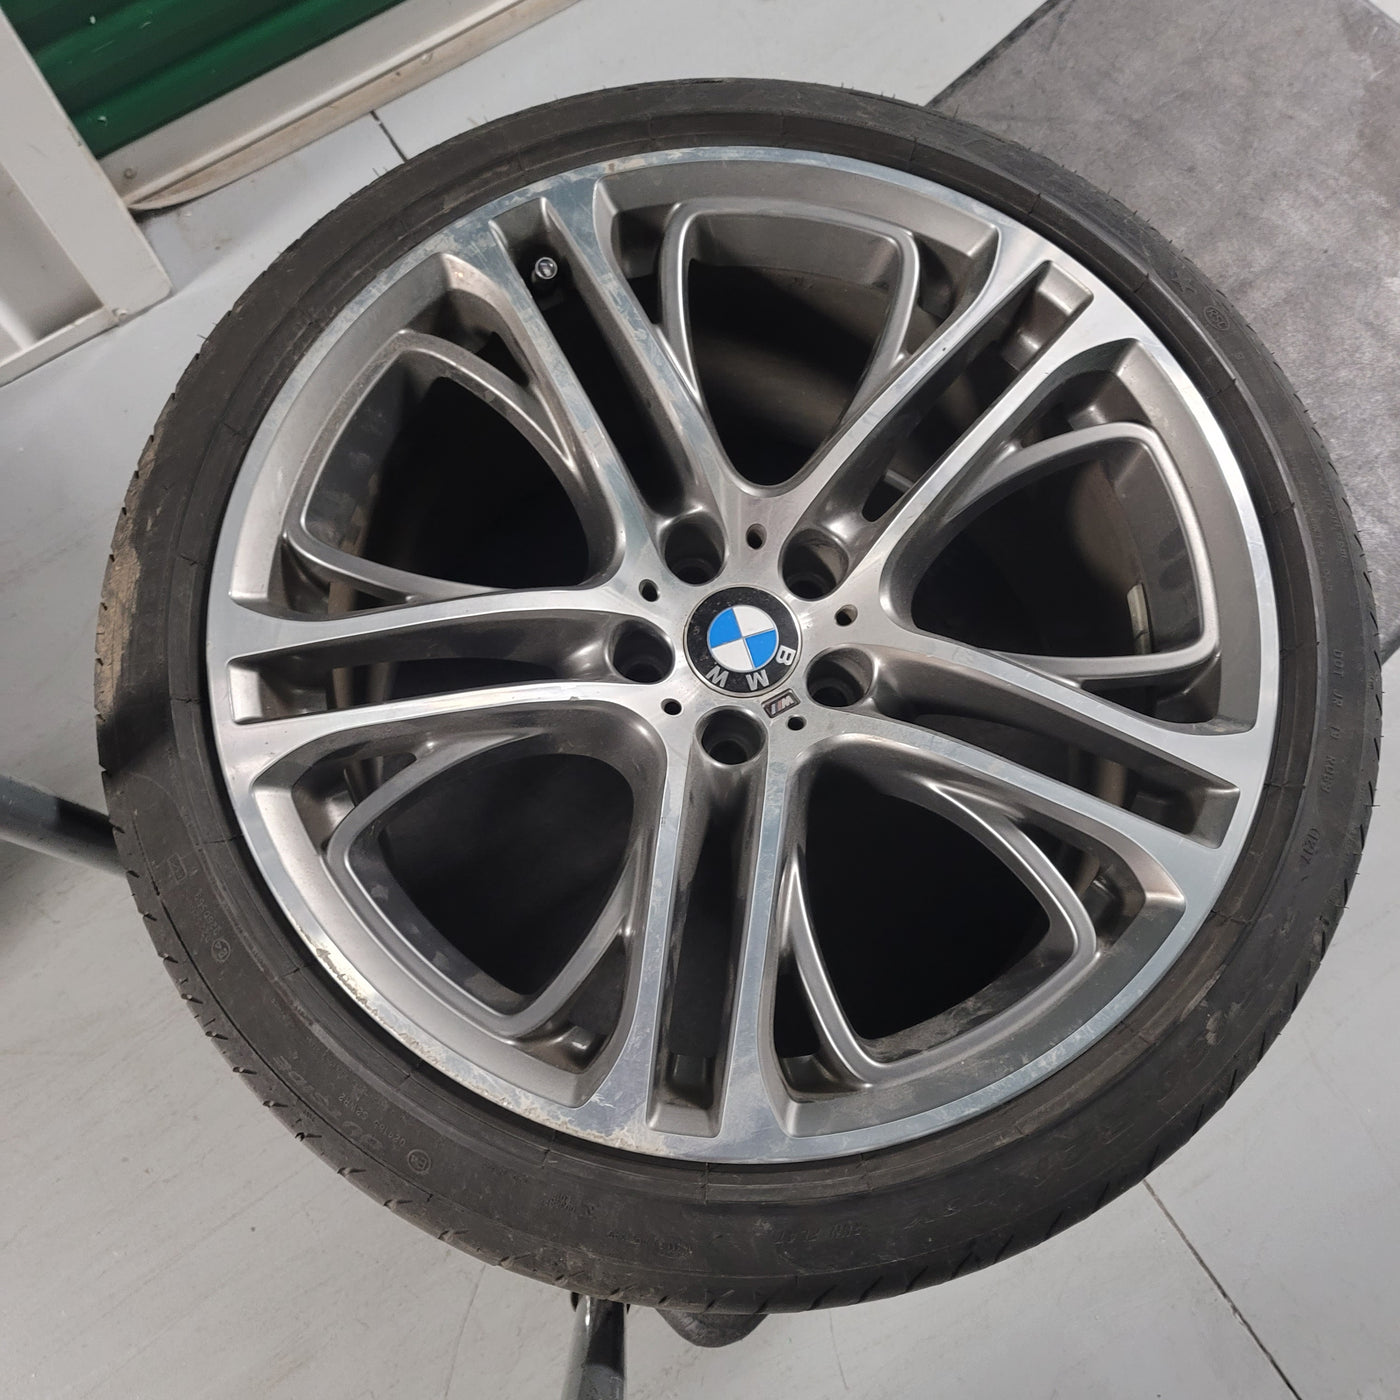 21 OEM BMW RIMS AND TIRES STYLE 310M